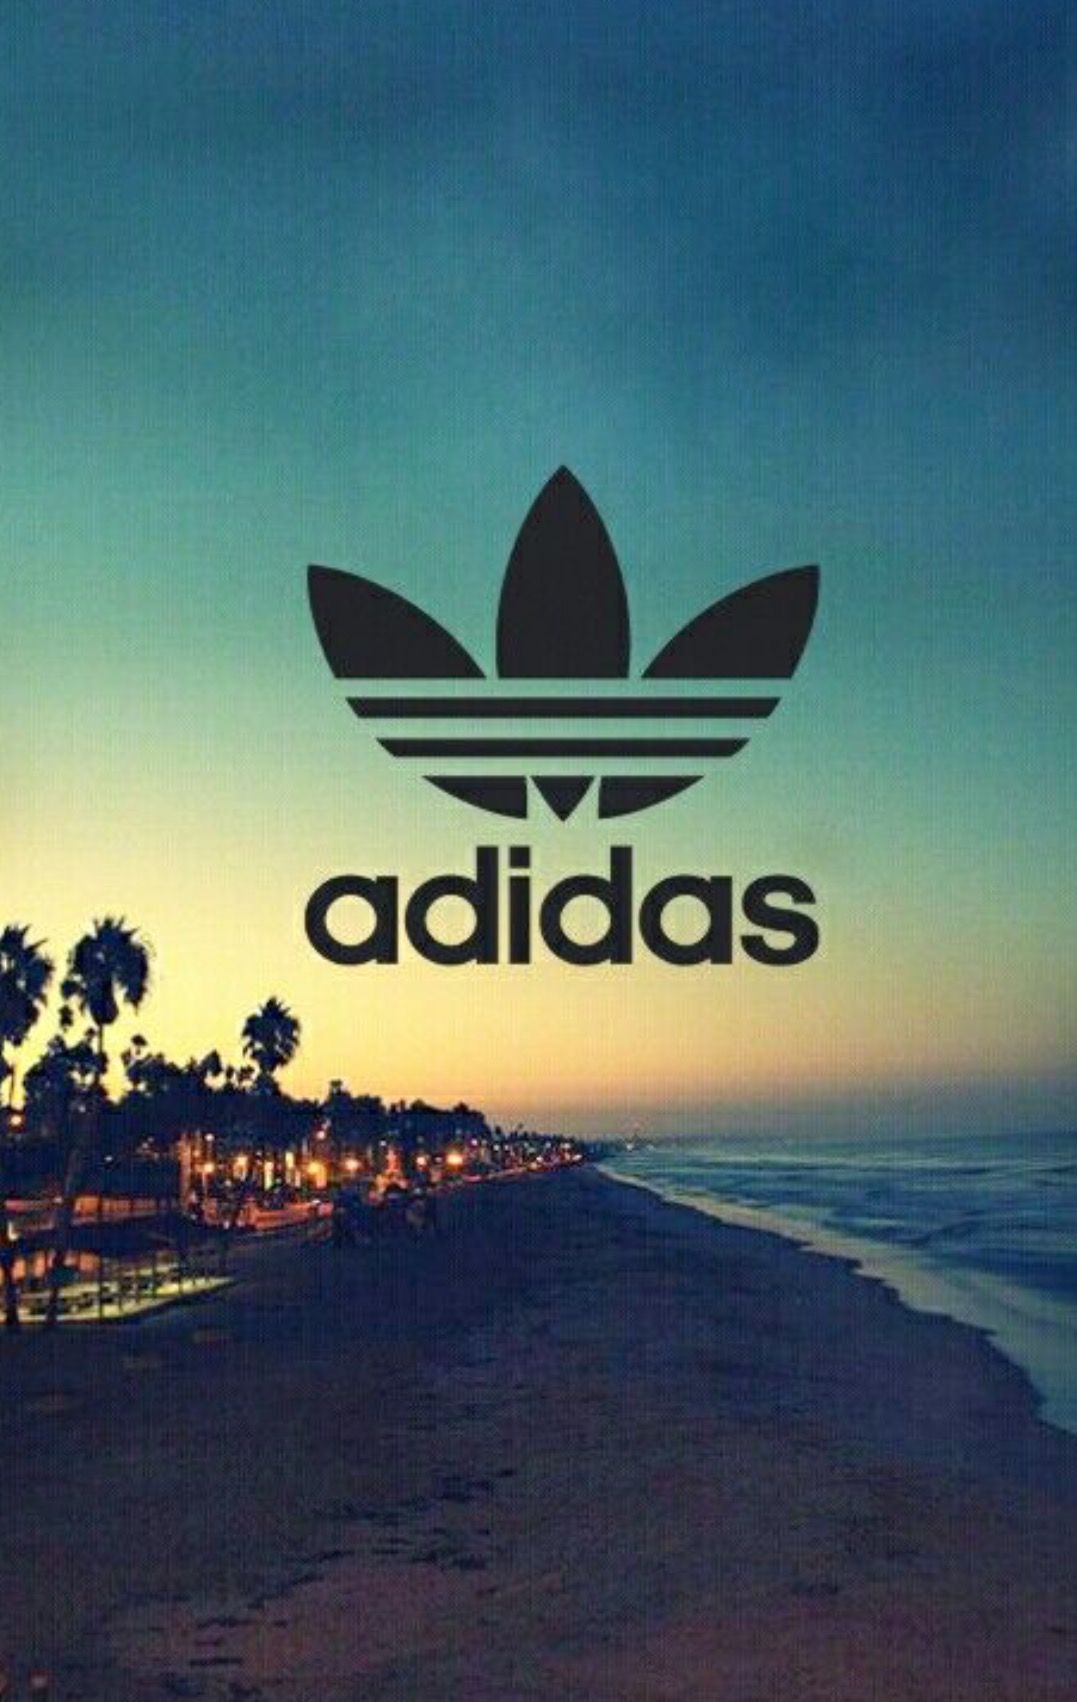 Found This Cool Screen Saver Adidas In